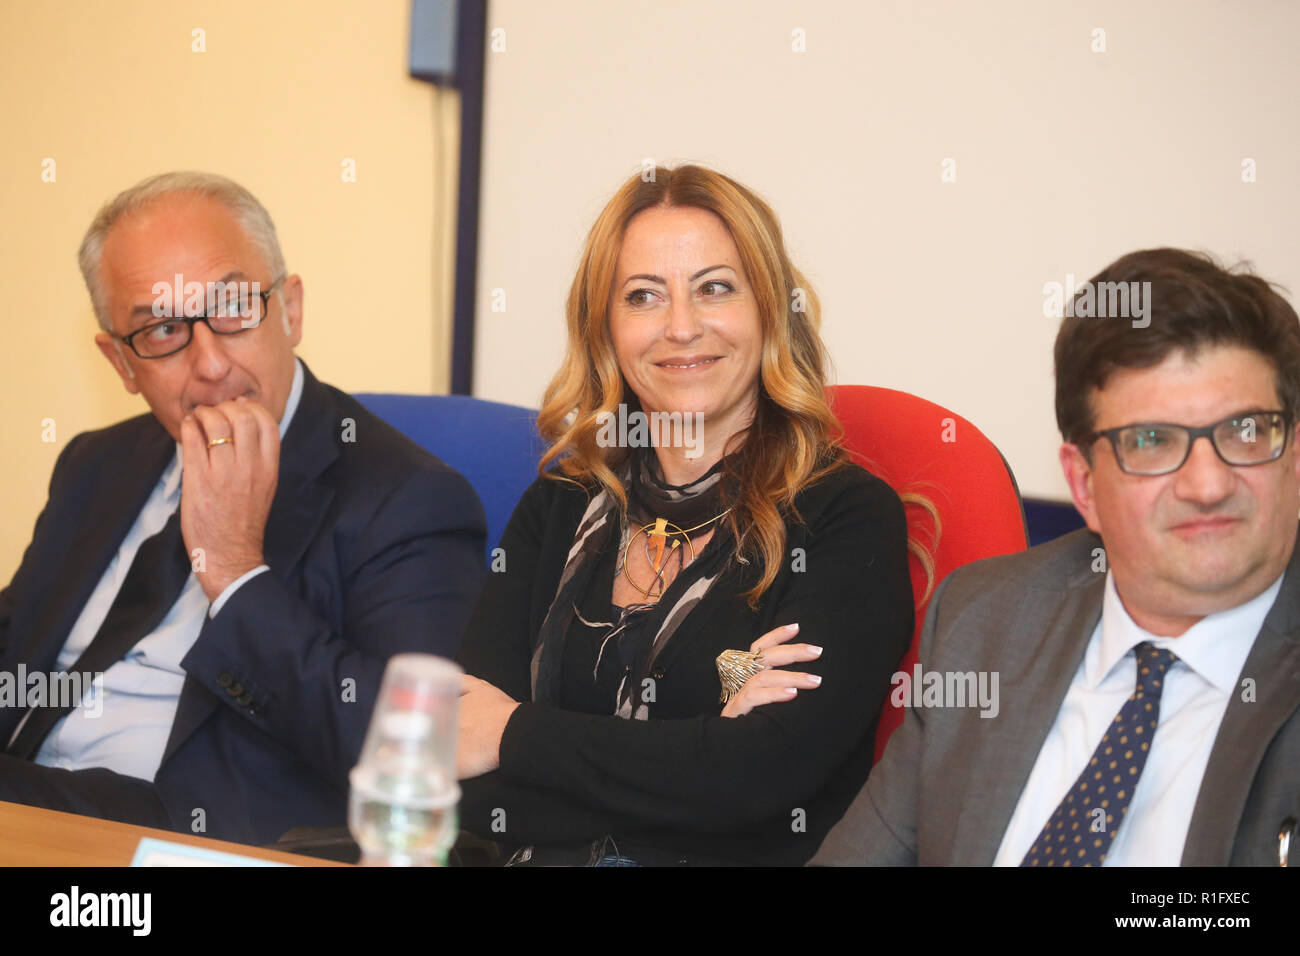 Caserta, Campania, Italy, 12th Nov 2018. School V ¡ educational circle of Caserta first in Italy to include asylum seekers in its staff in photo the assessor Lucia Fortini with appointments Education, Youth Policies and Social Policies to the Campania Region Credit: Antonio Balasco/Alamy Live News Stock Photo